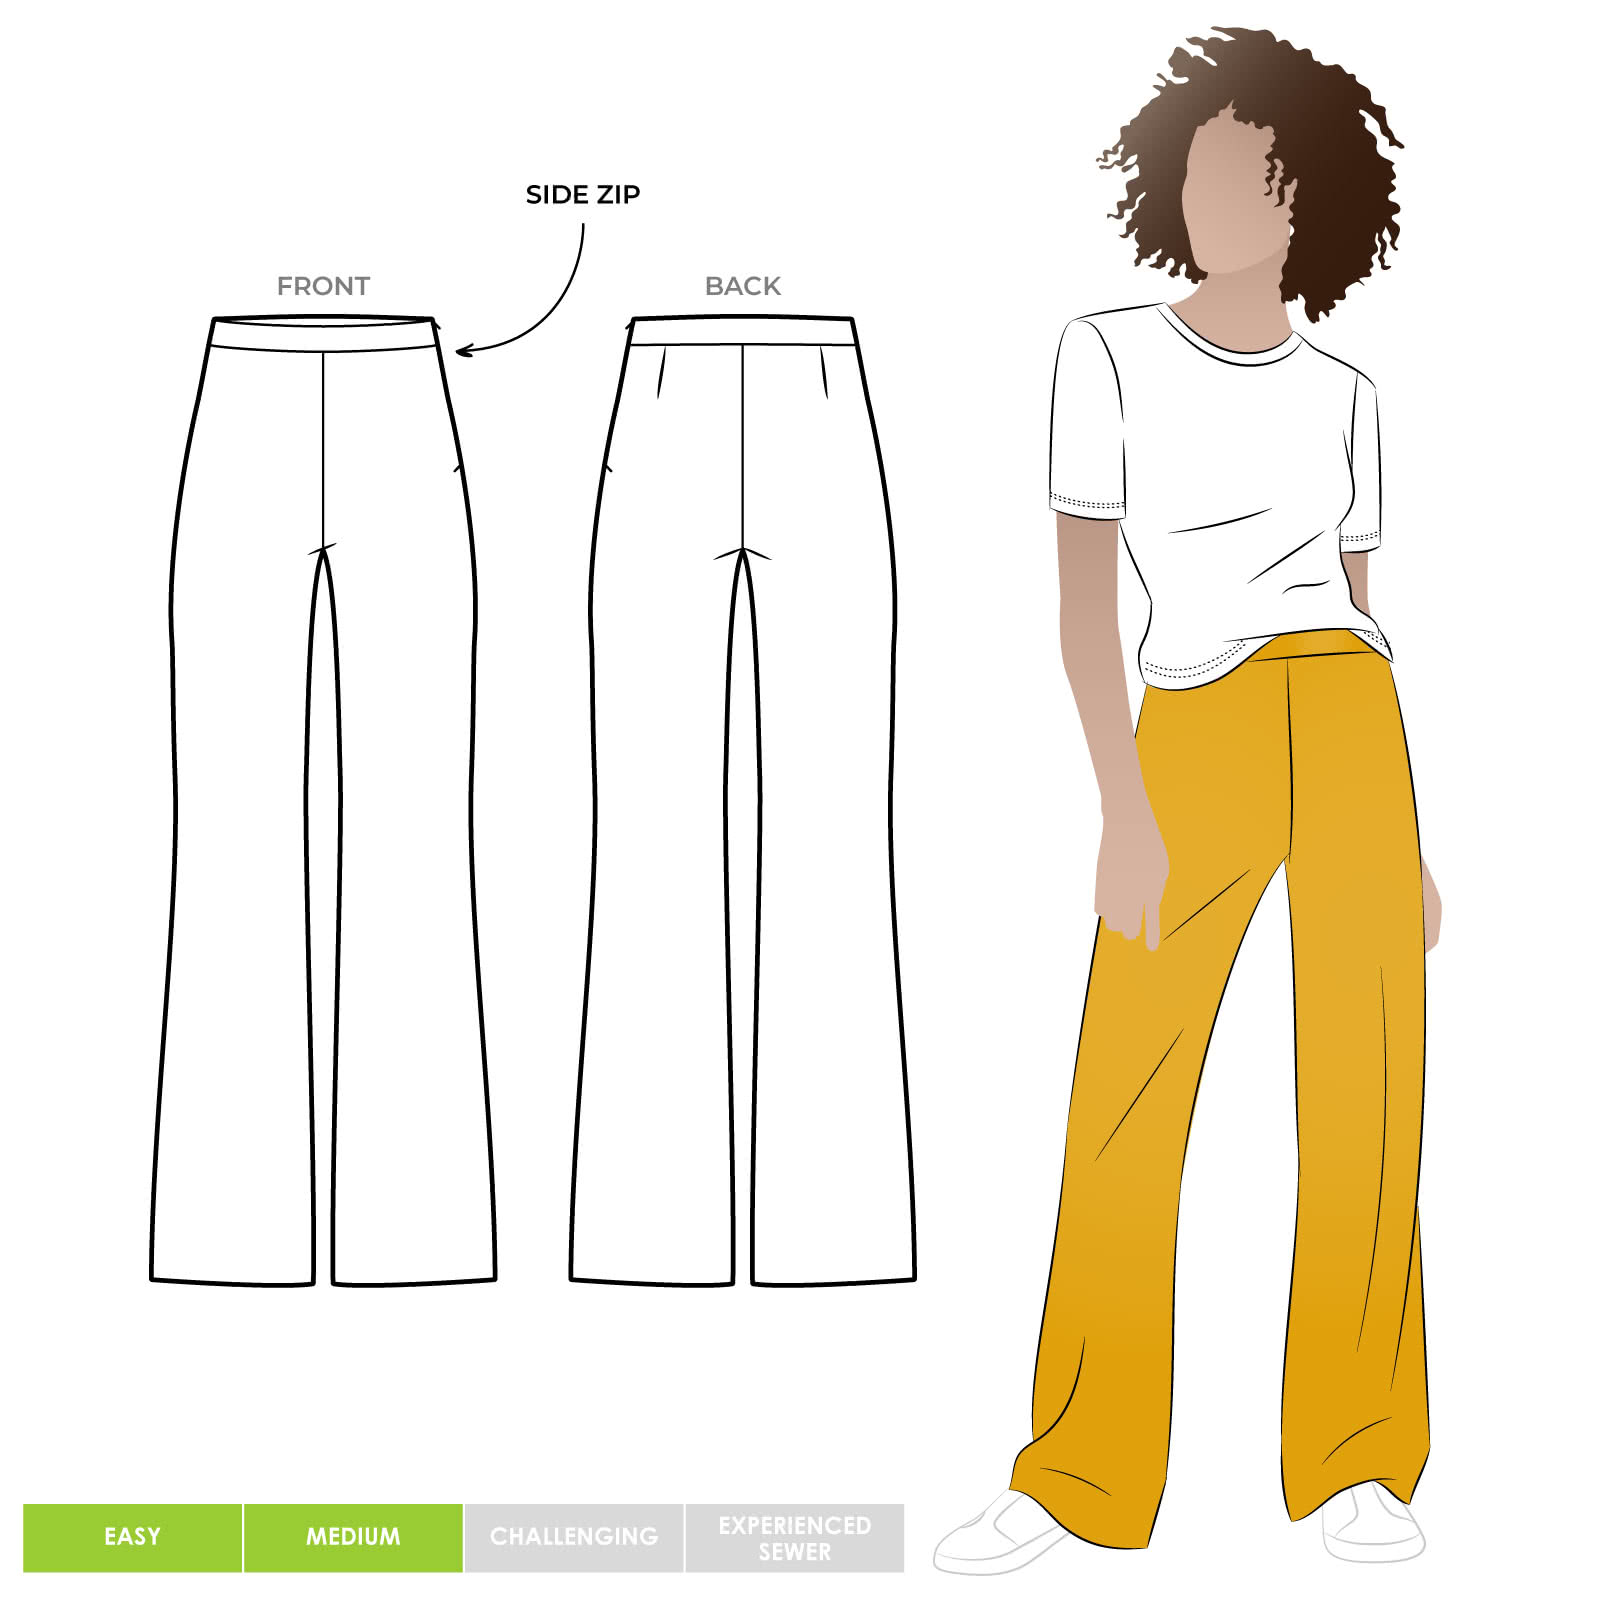 Trouser Leg Opening Size: What Range is Acceptable, How You Should Decide |  Page 3 | Styleforum